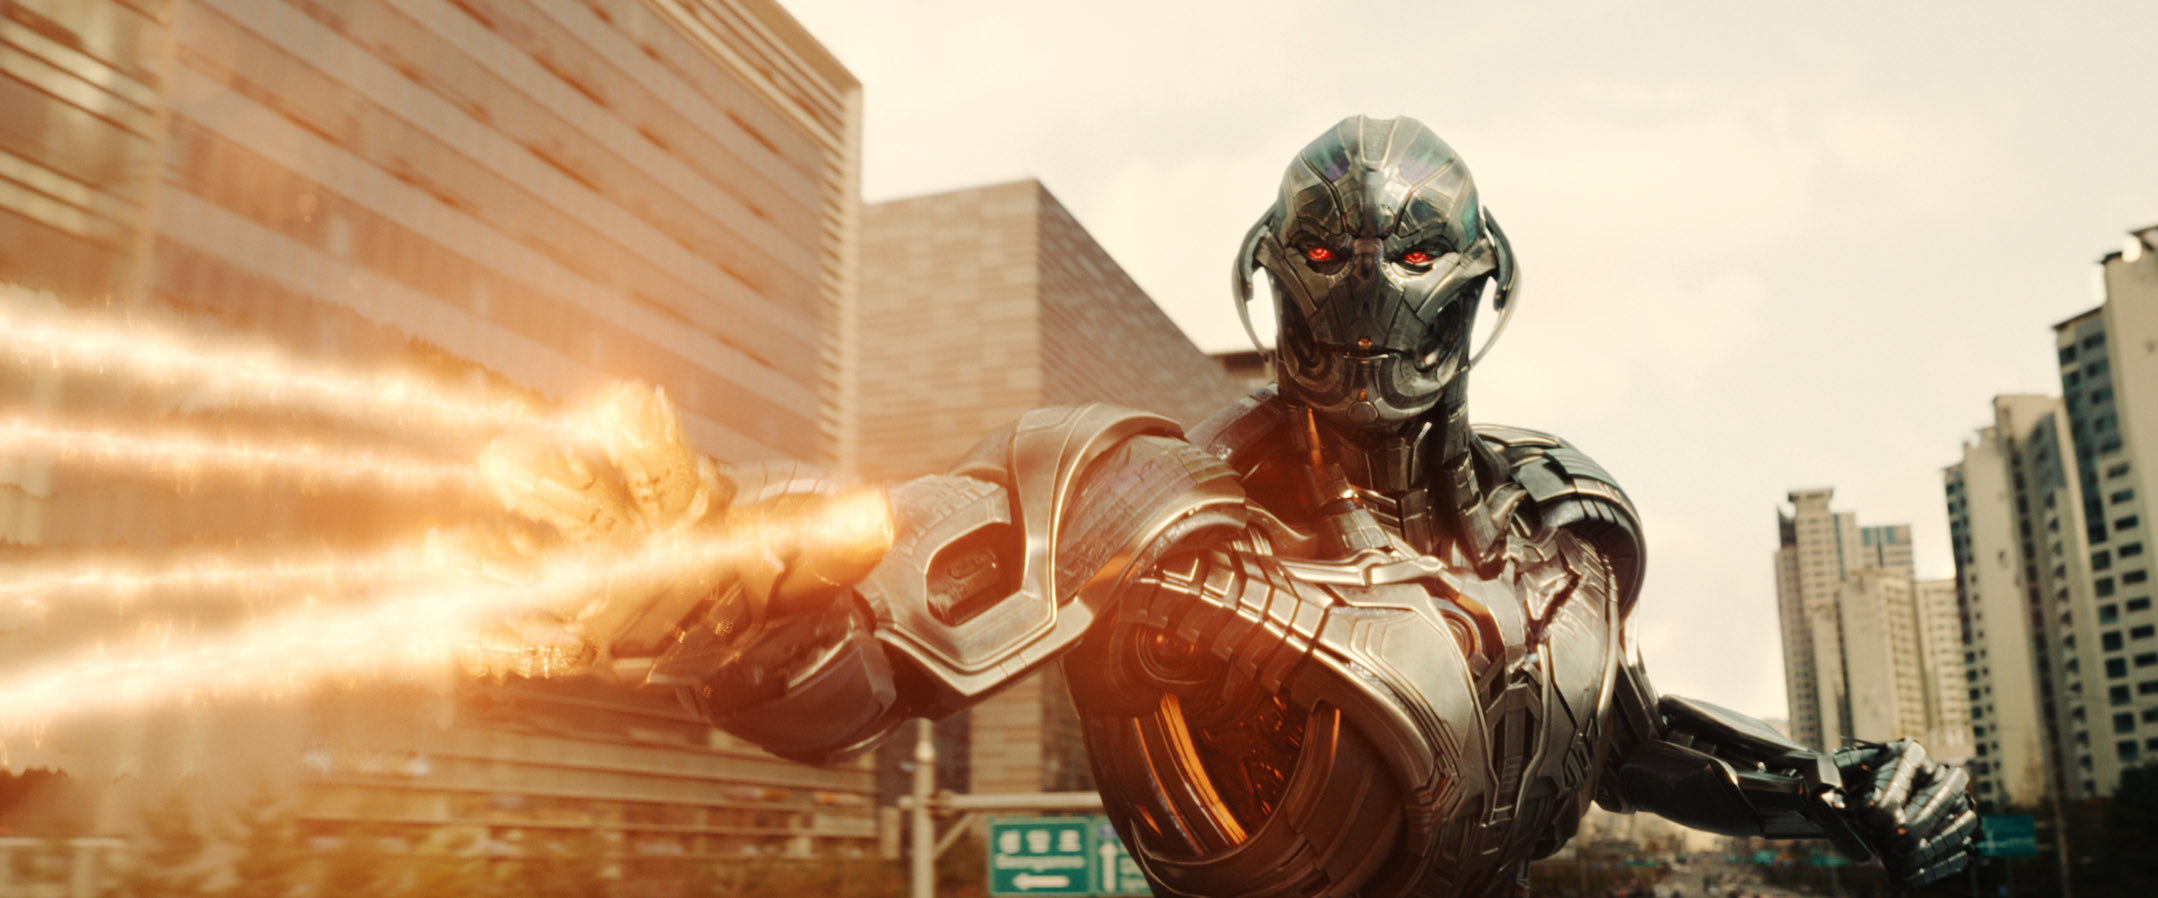 Ultron shoots lasers out of his fingers